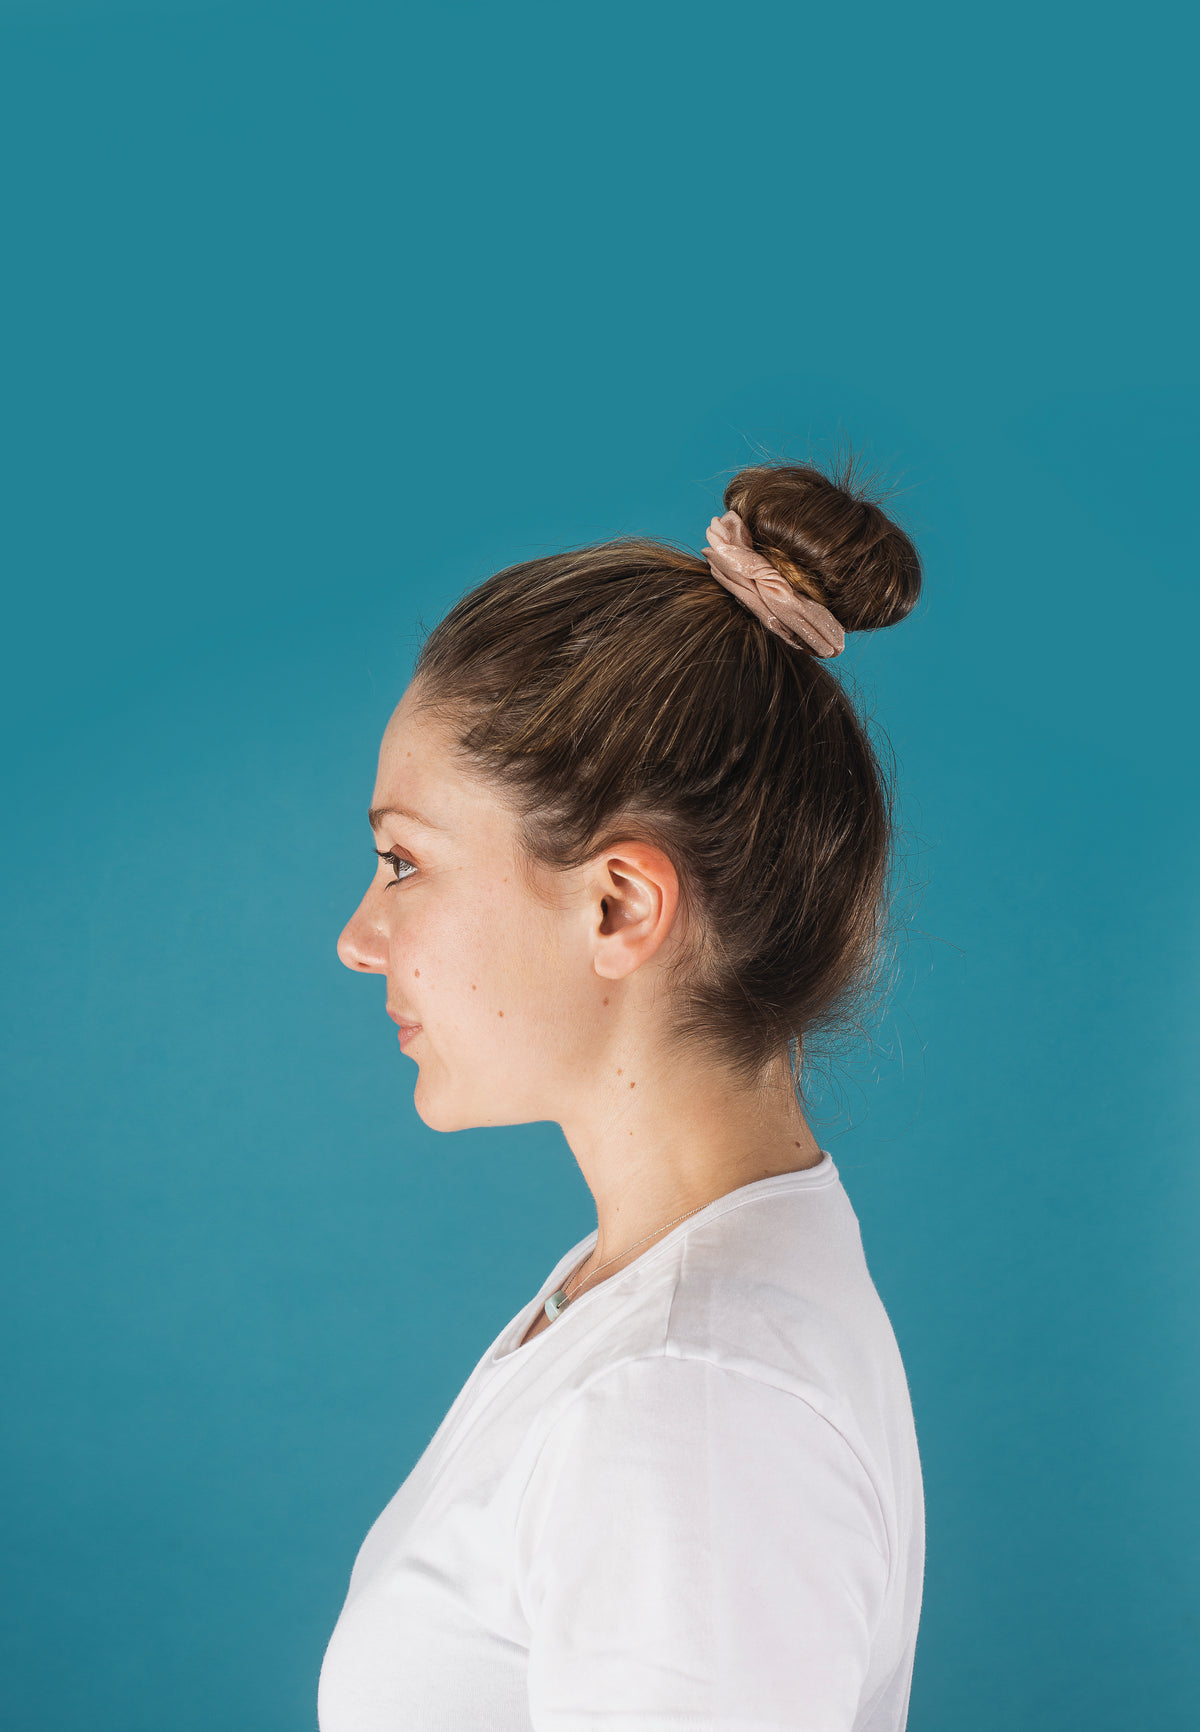 profile of a woman with her hair in a scrunchie bun